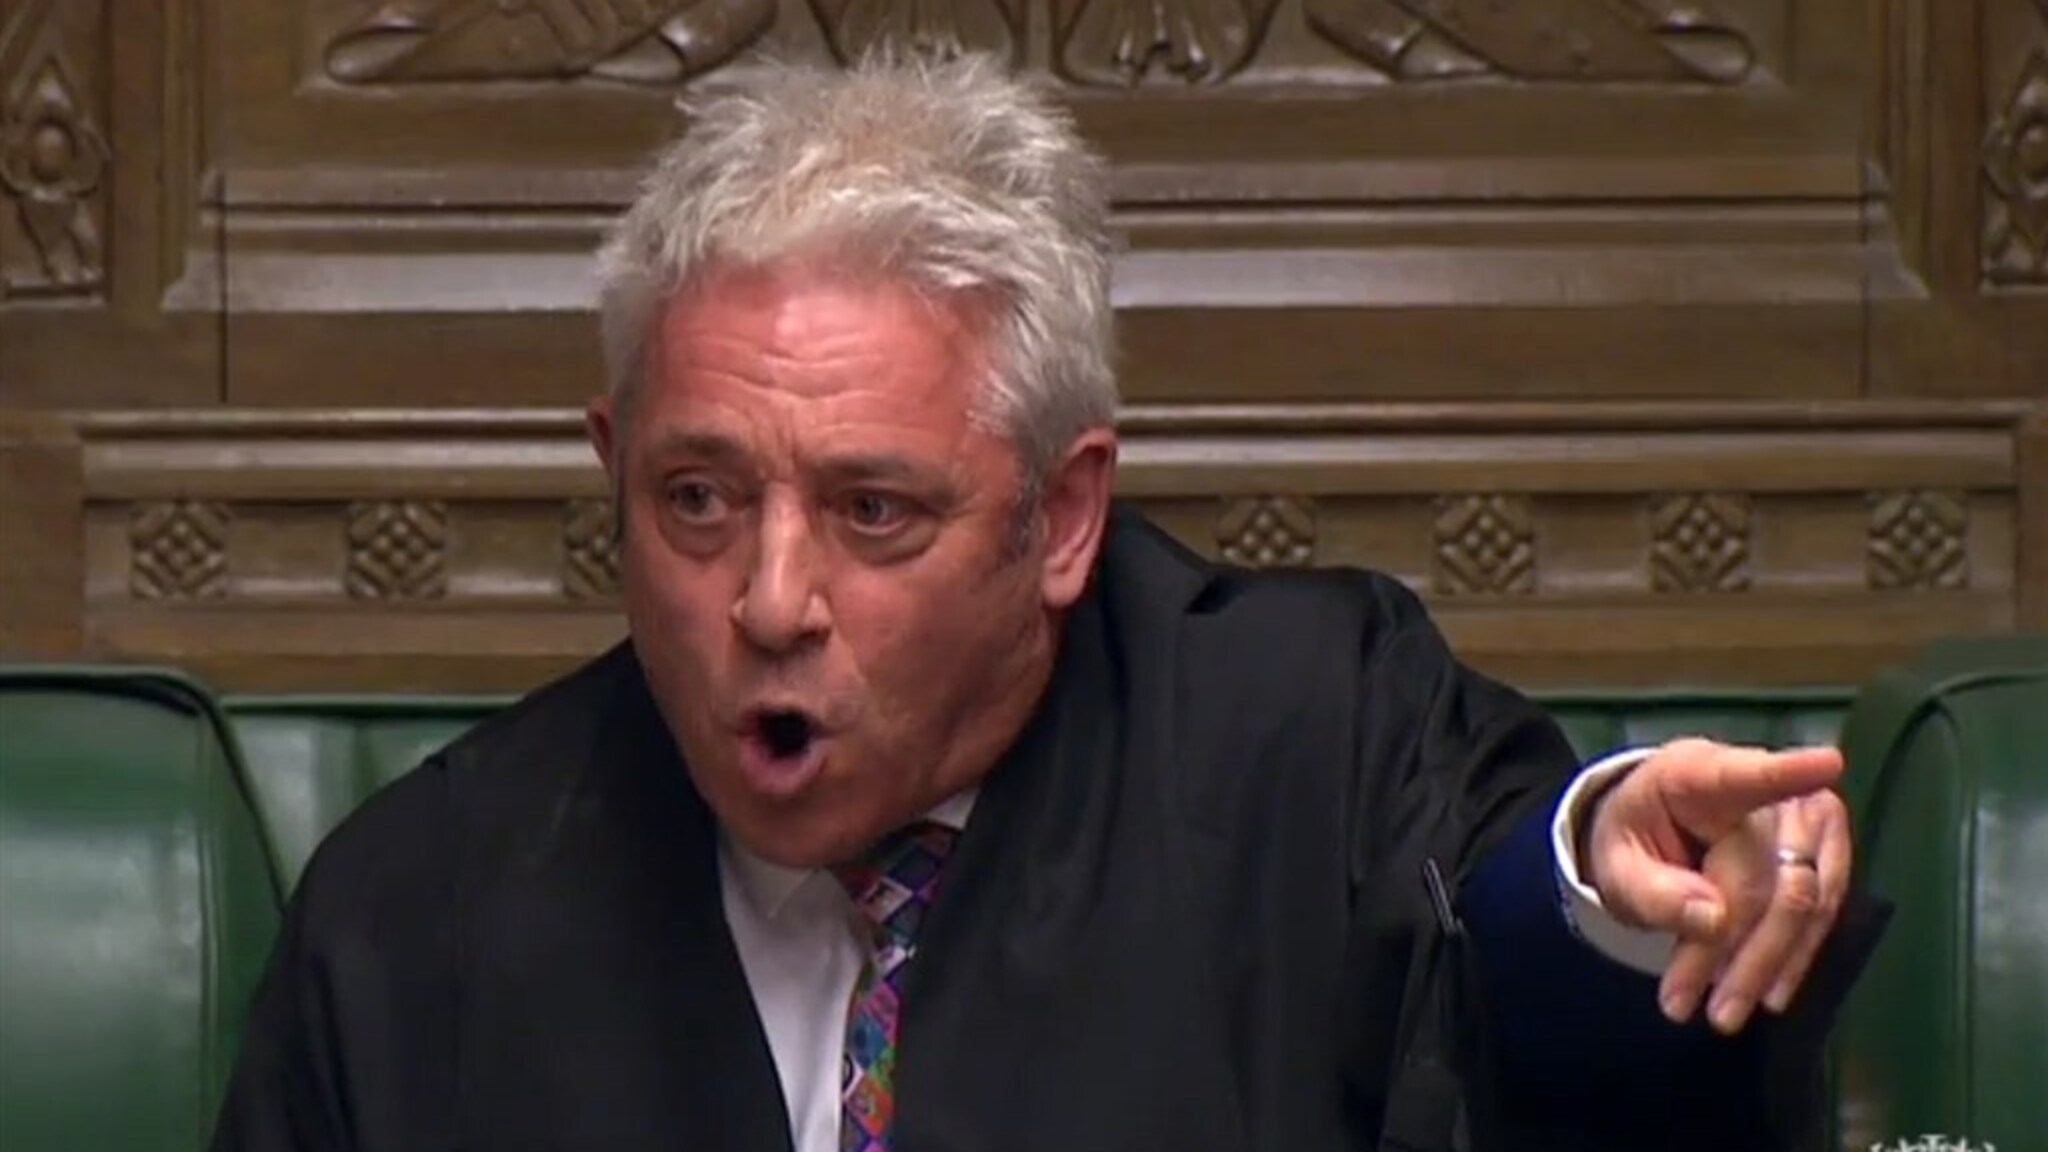 Investigation: Former Speaker of the British House of Commons John ‘Orderrrrr’ Bercow was a tyrant